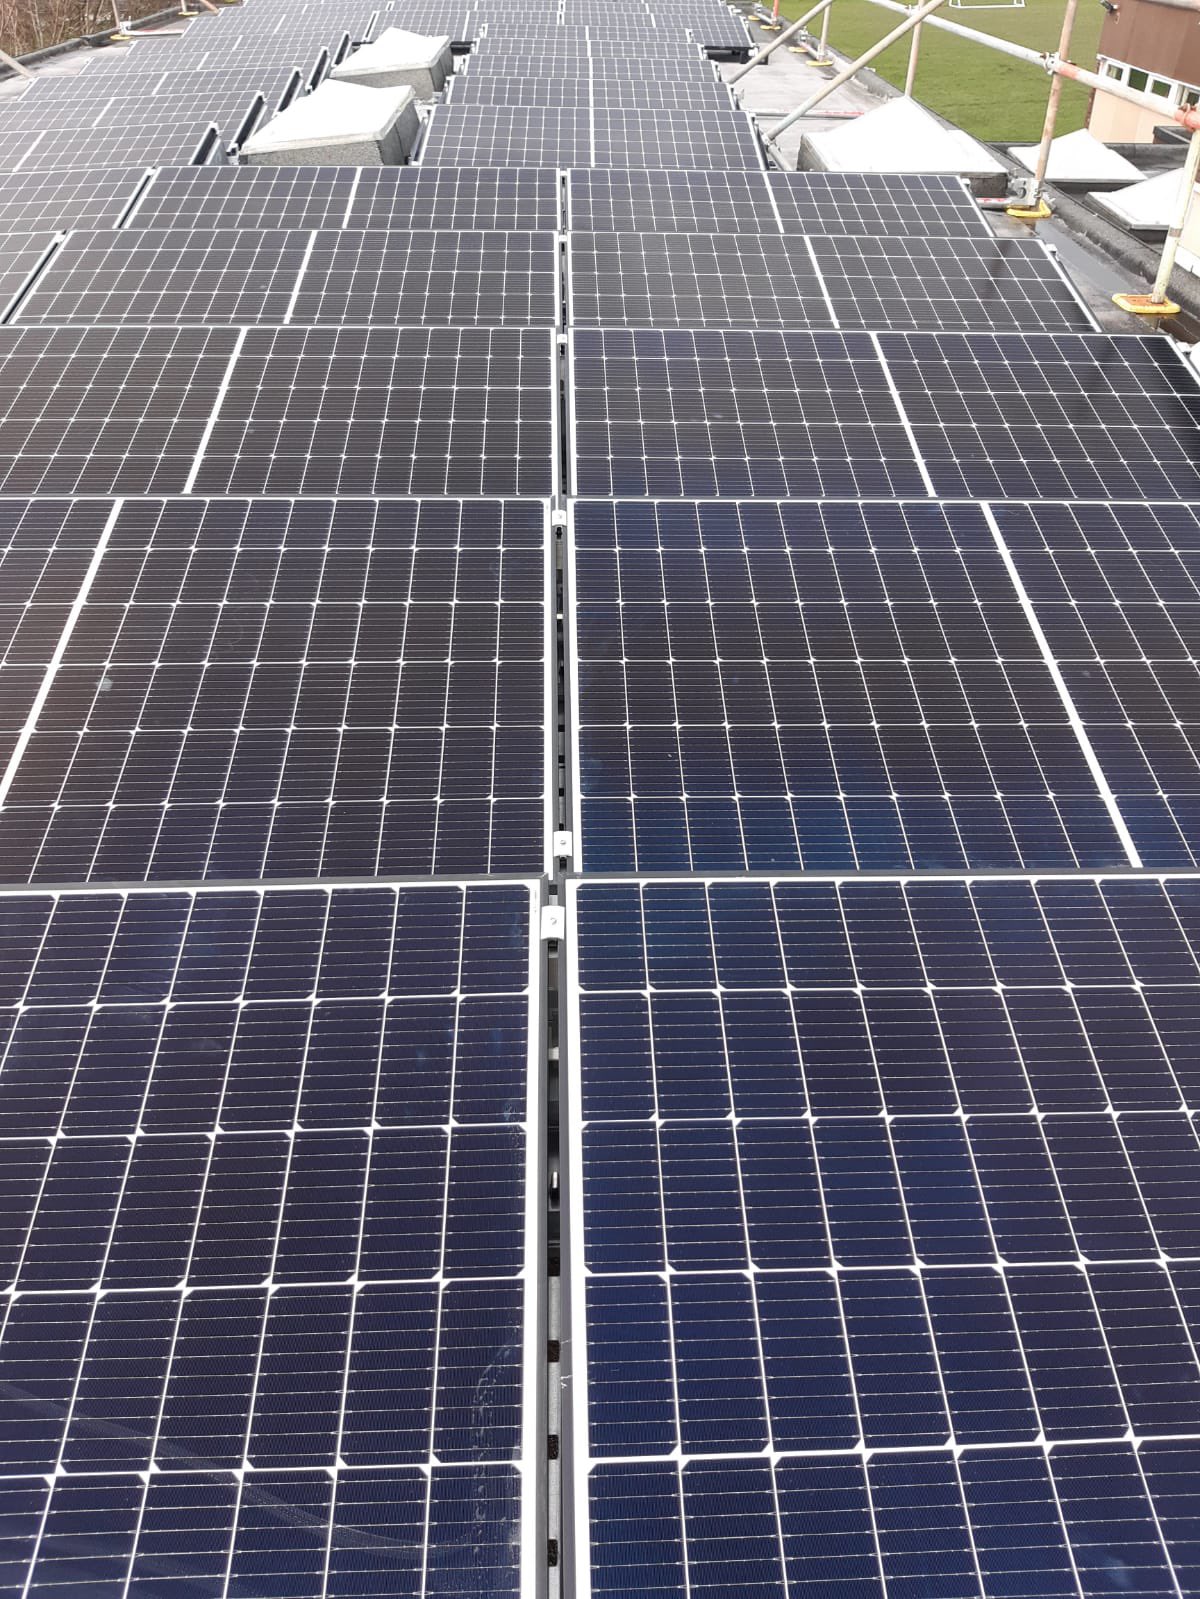 Bollington St John's Primary School on Twitter: "37 solar panels have been fitted on the roof, thanks to the wonderful LA Solar Panel competition our amazing children won last year. Thank you